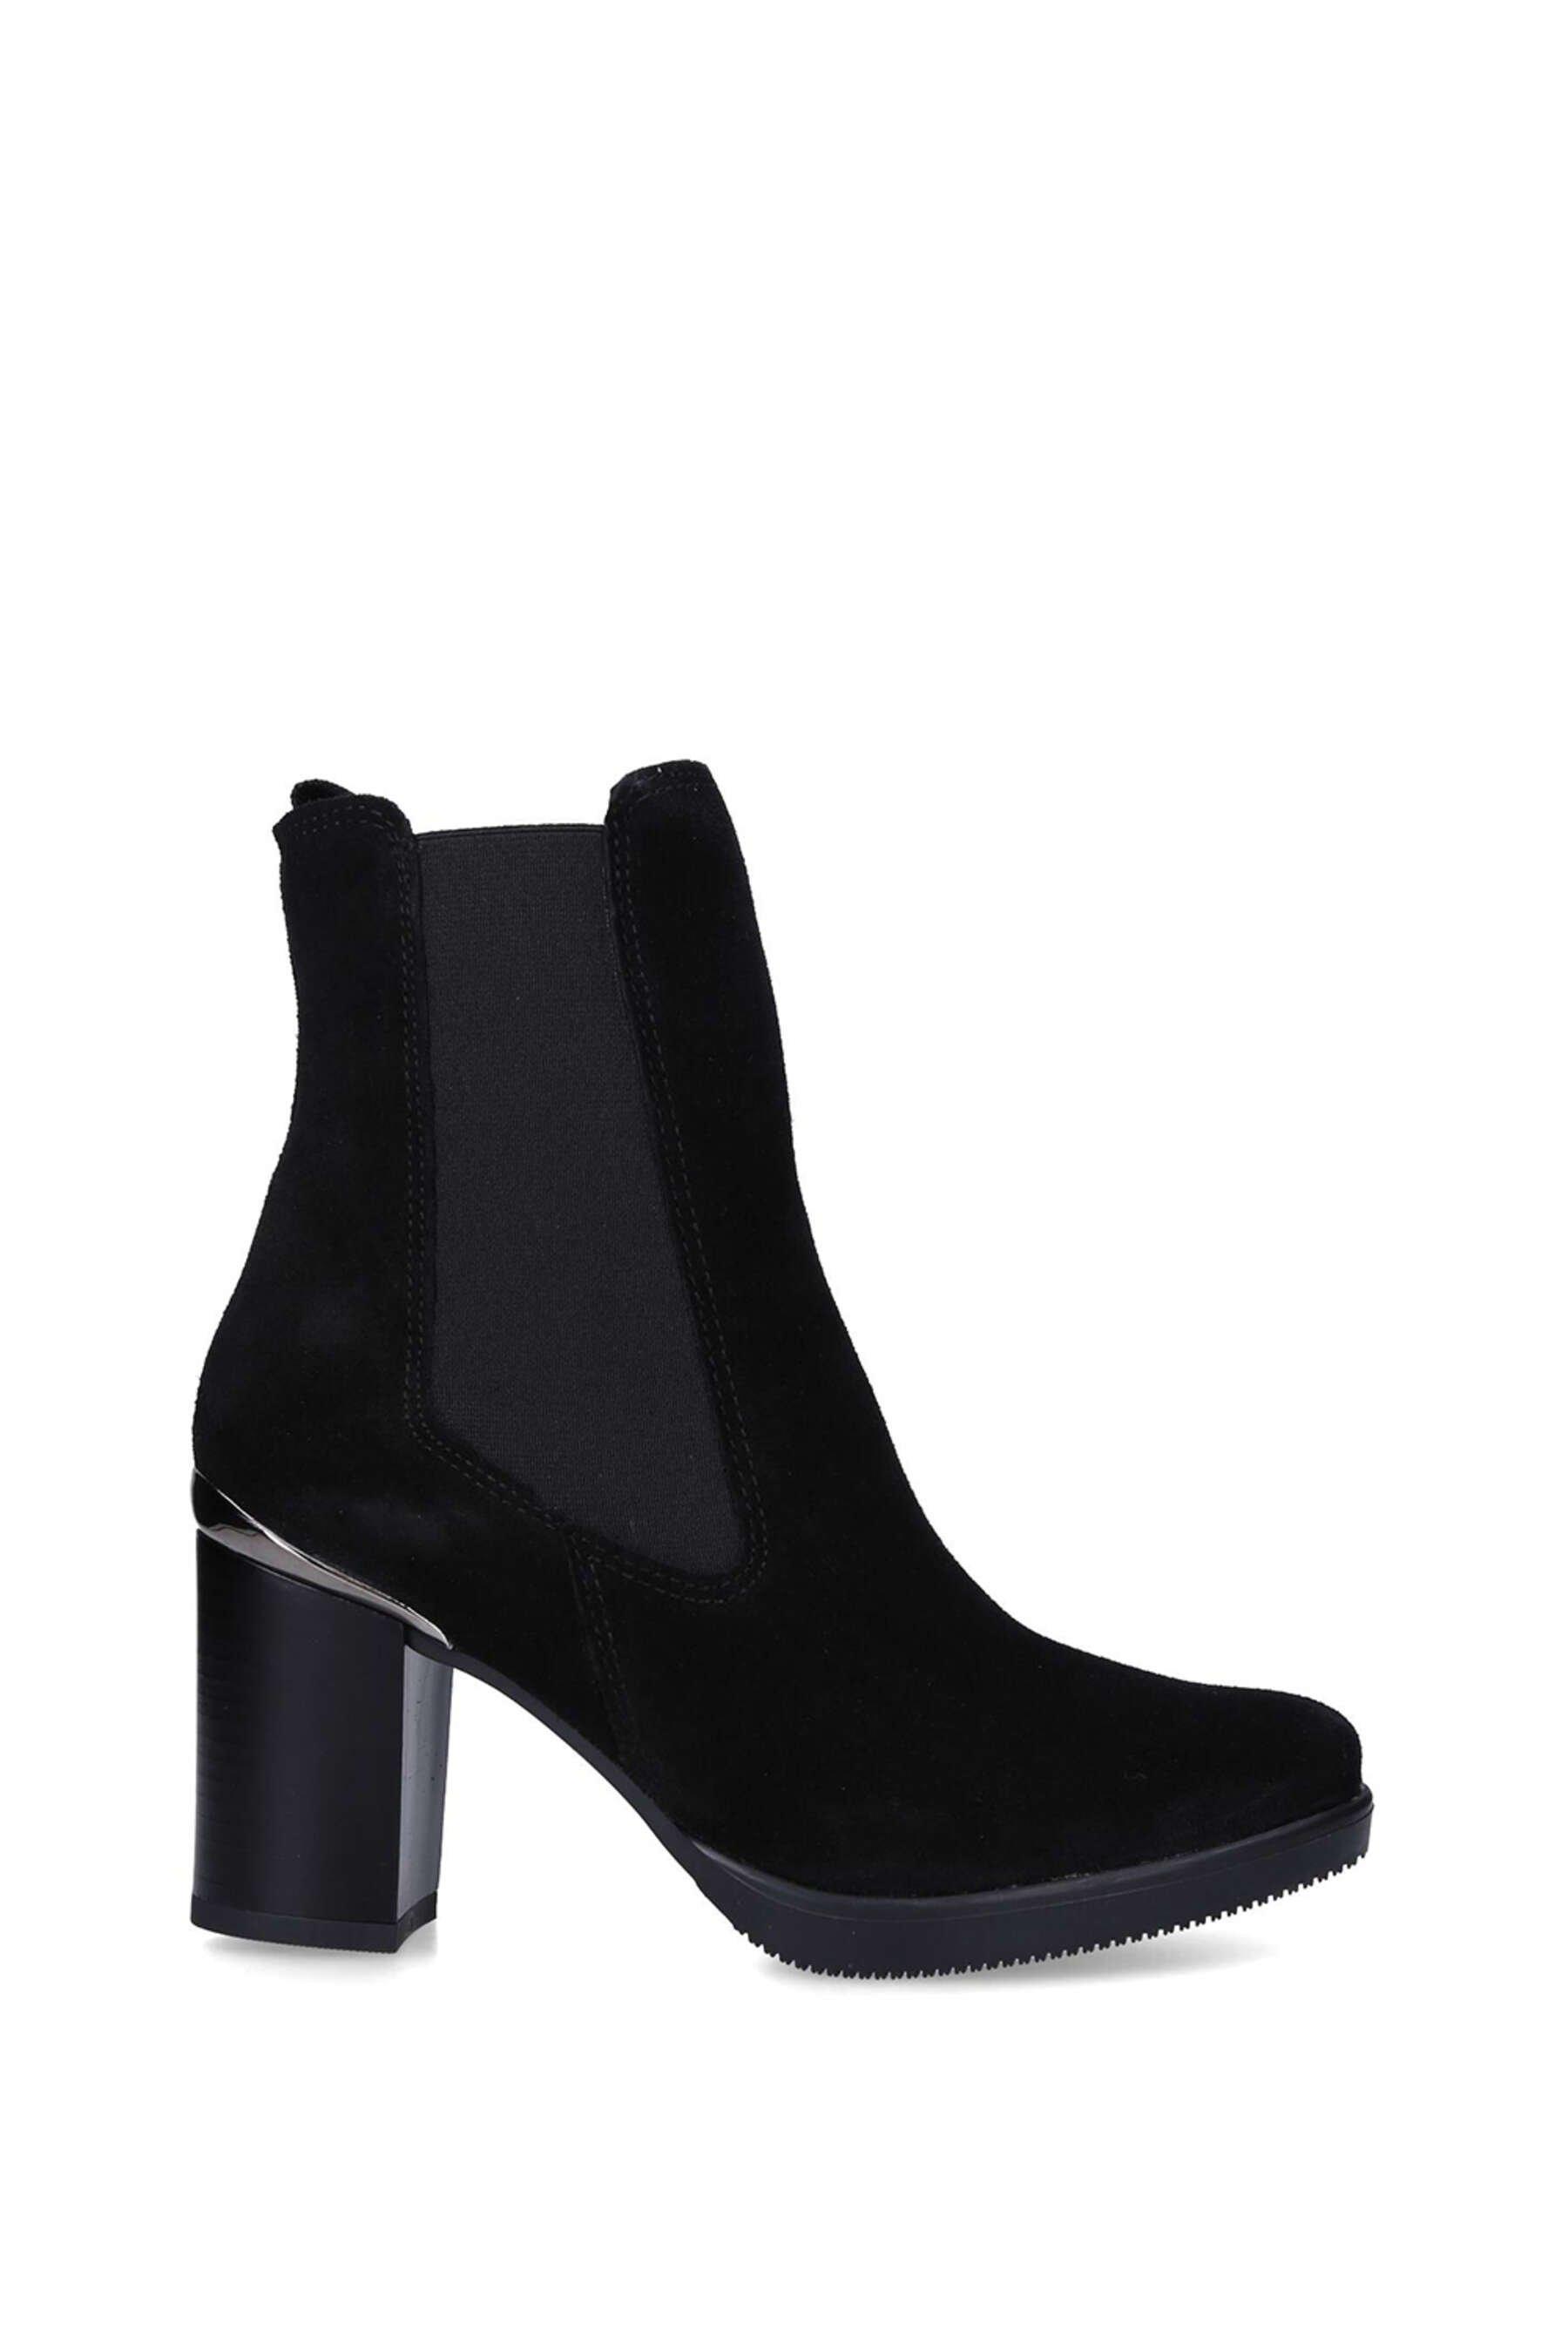 Boots | 'Reach Ankle Boot' Suede Boots | Carvela